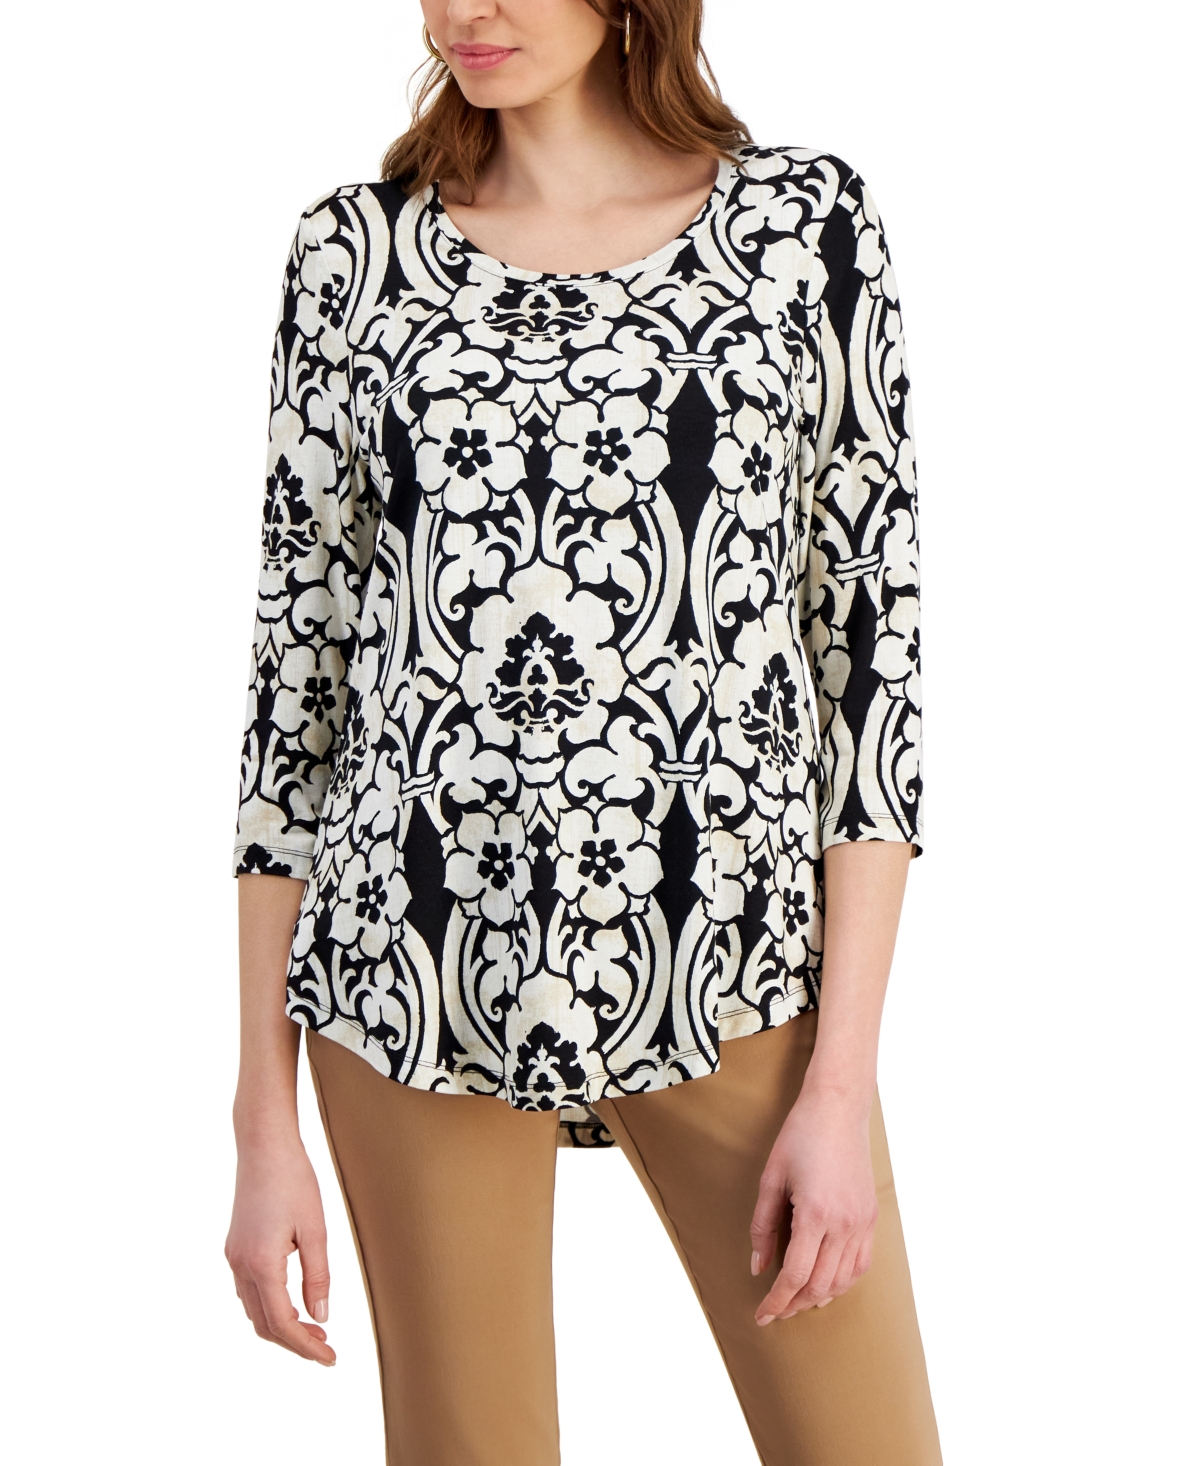 Women's Printed Knit 3/4-Sleeve Top, Created for Macy's - White Scrolls